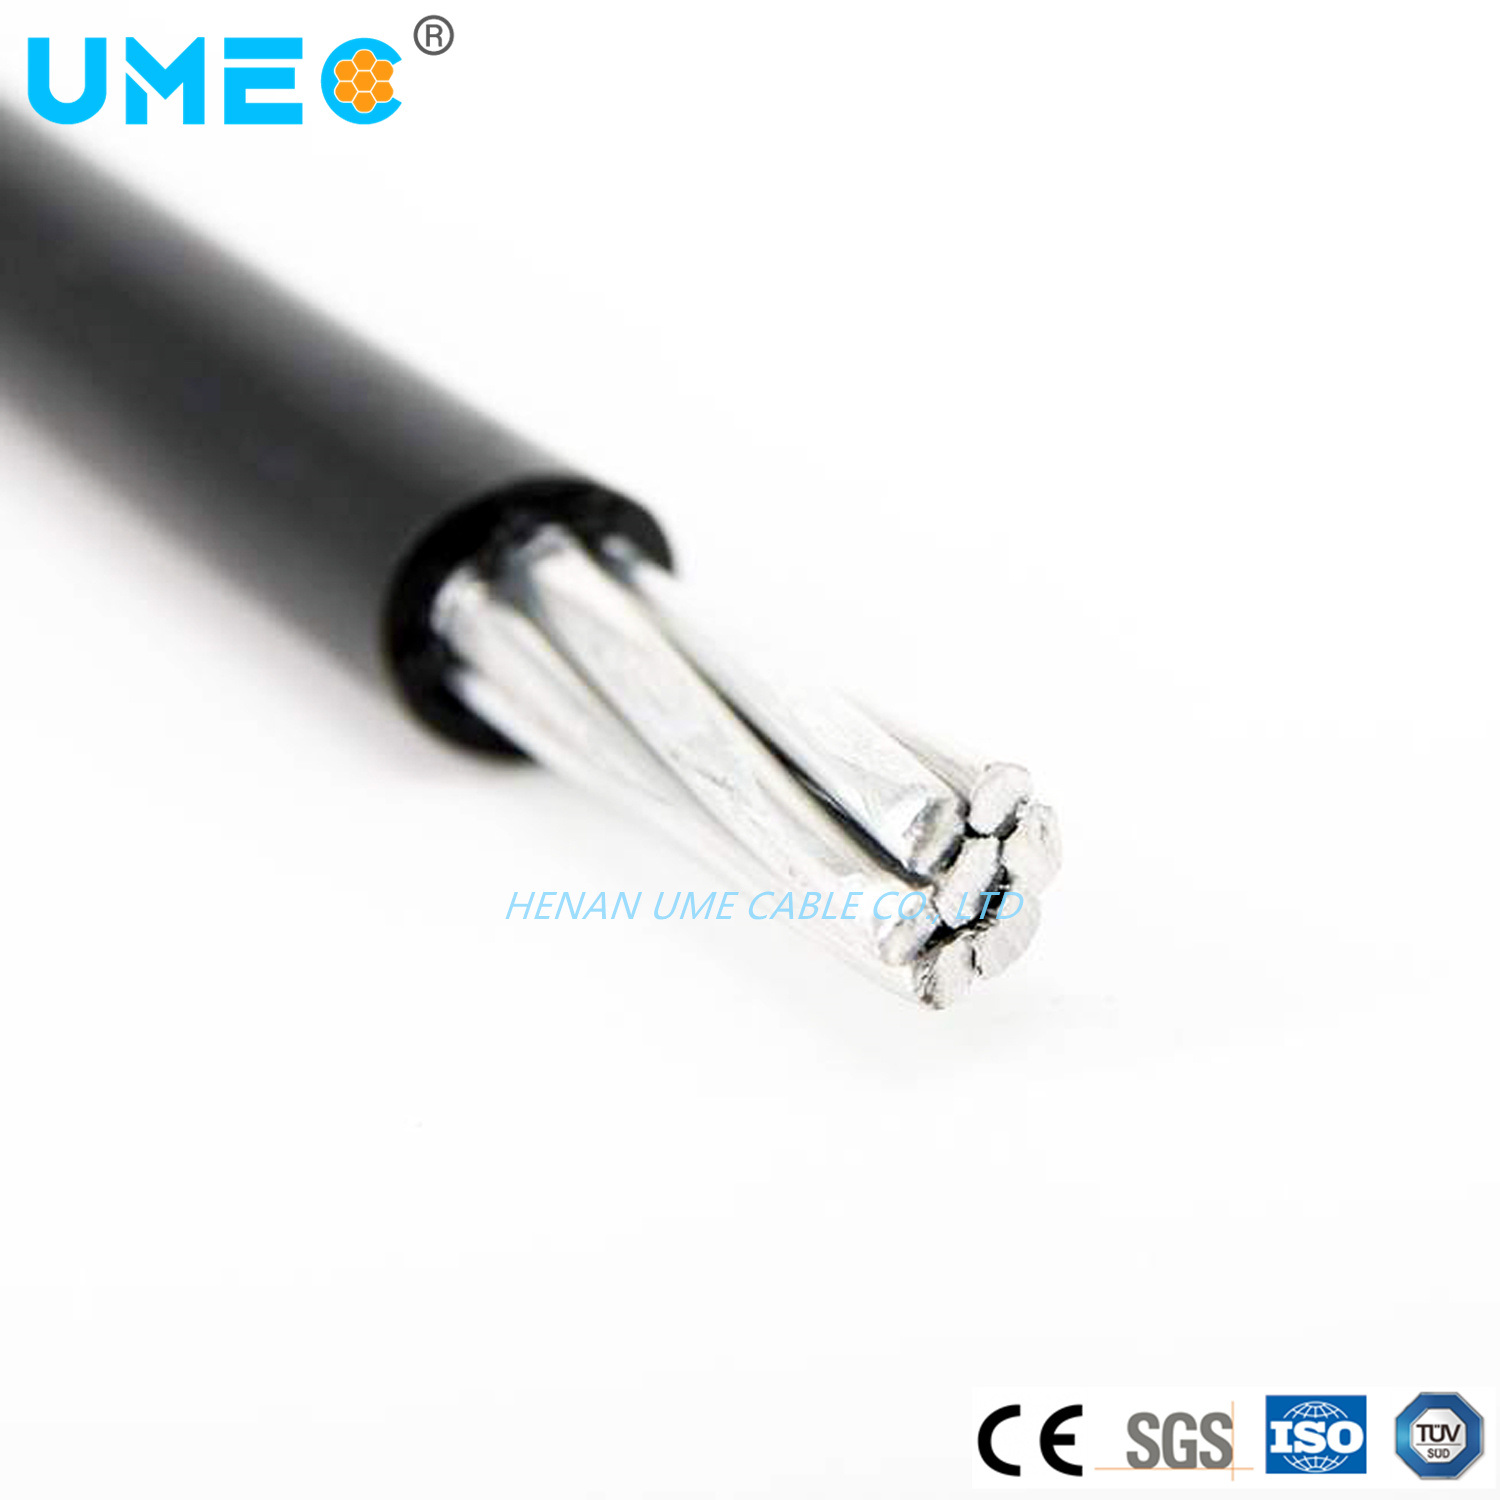 Overhead XLPE PVC PE HDPE Insulated Aerial Bundled Single Core Cable ABC Cable